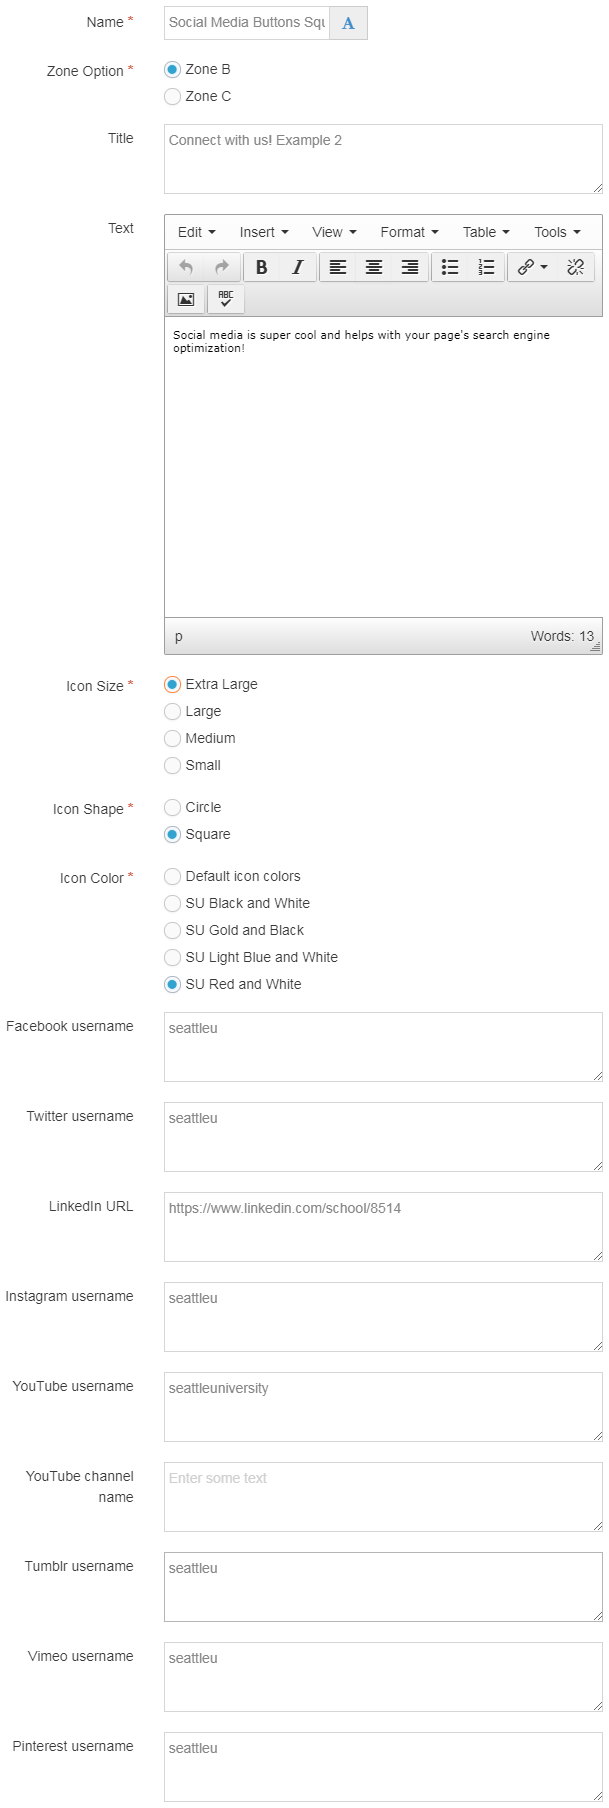 Screen shot of Social Media Buttons content type